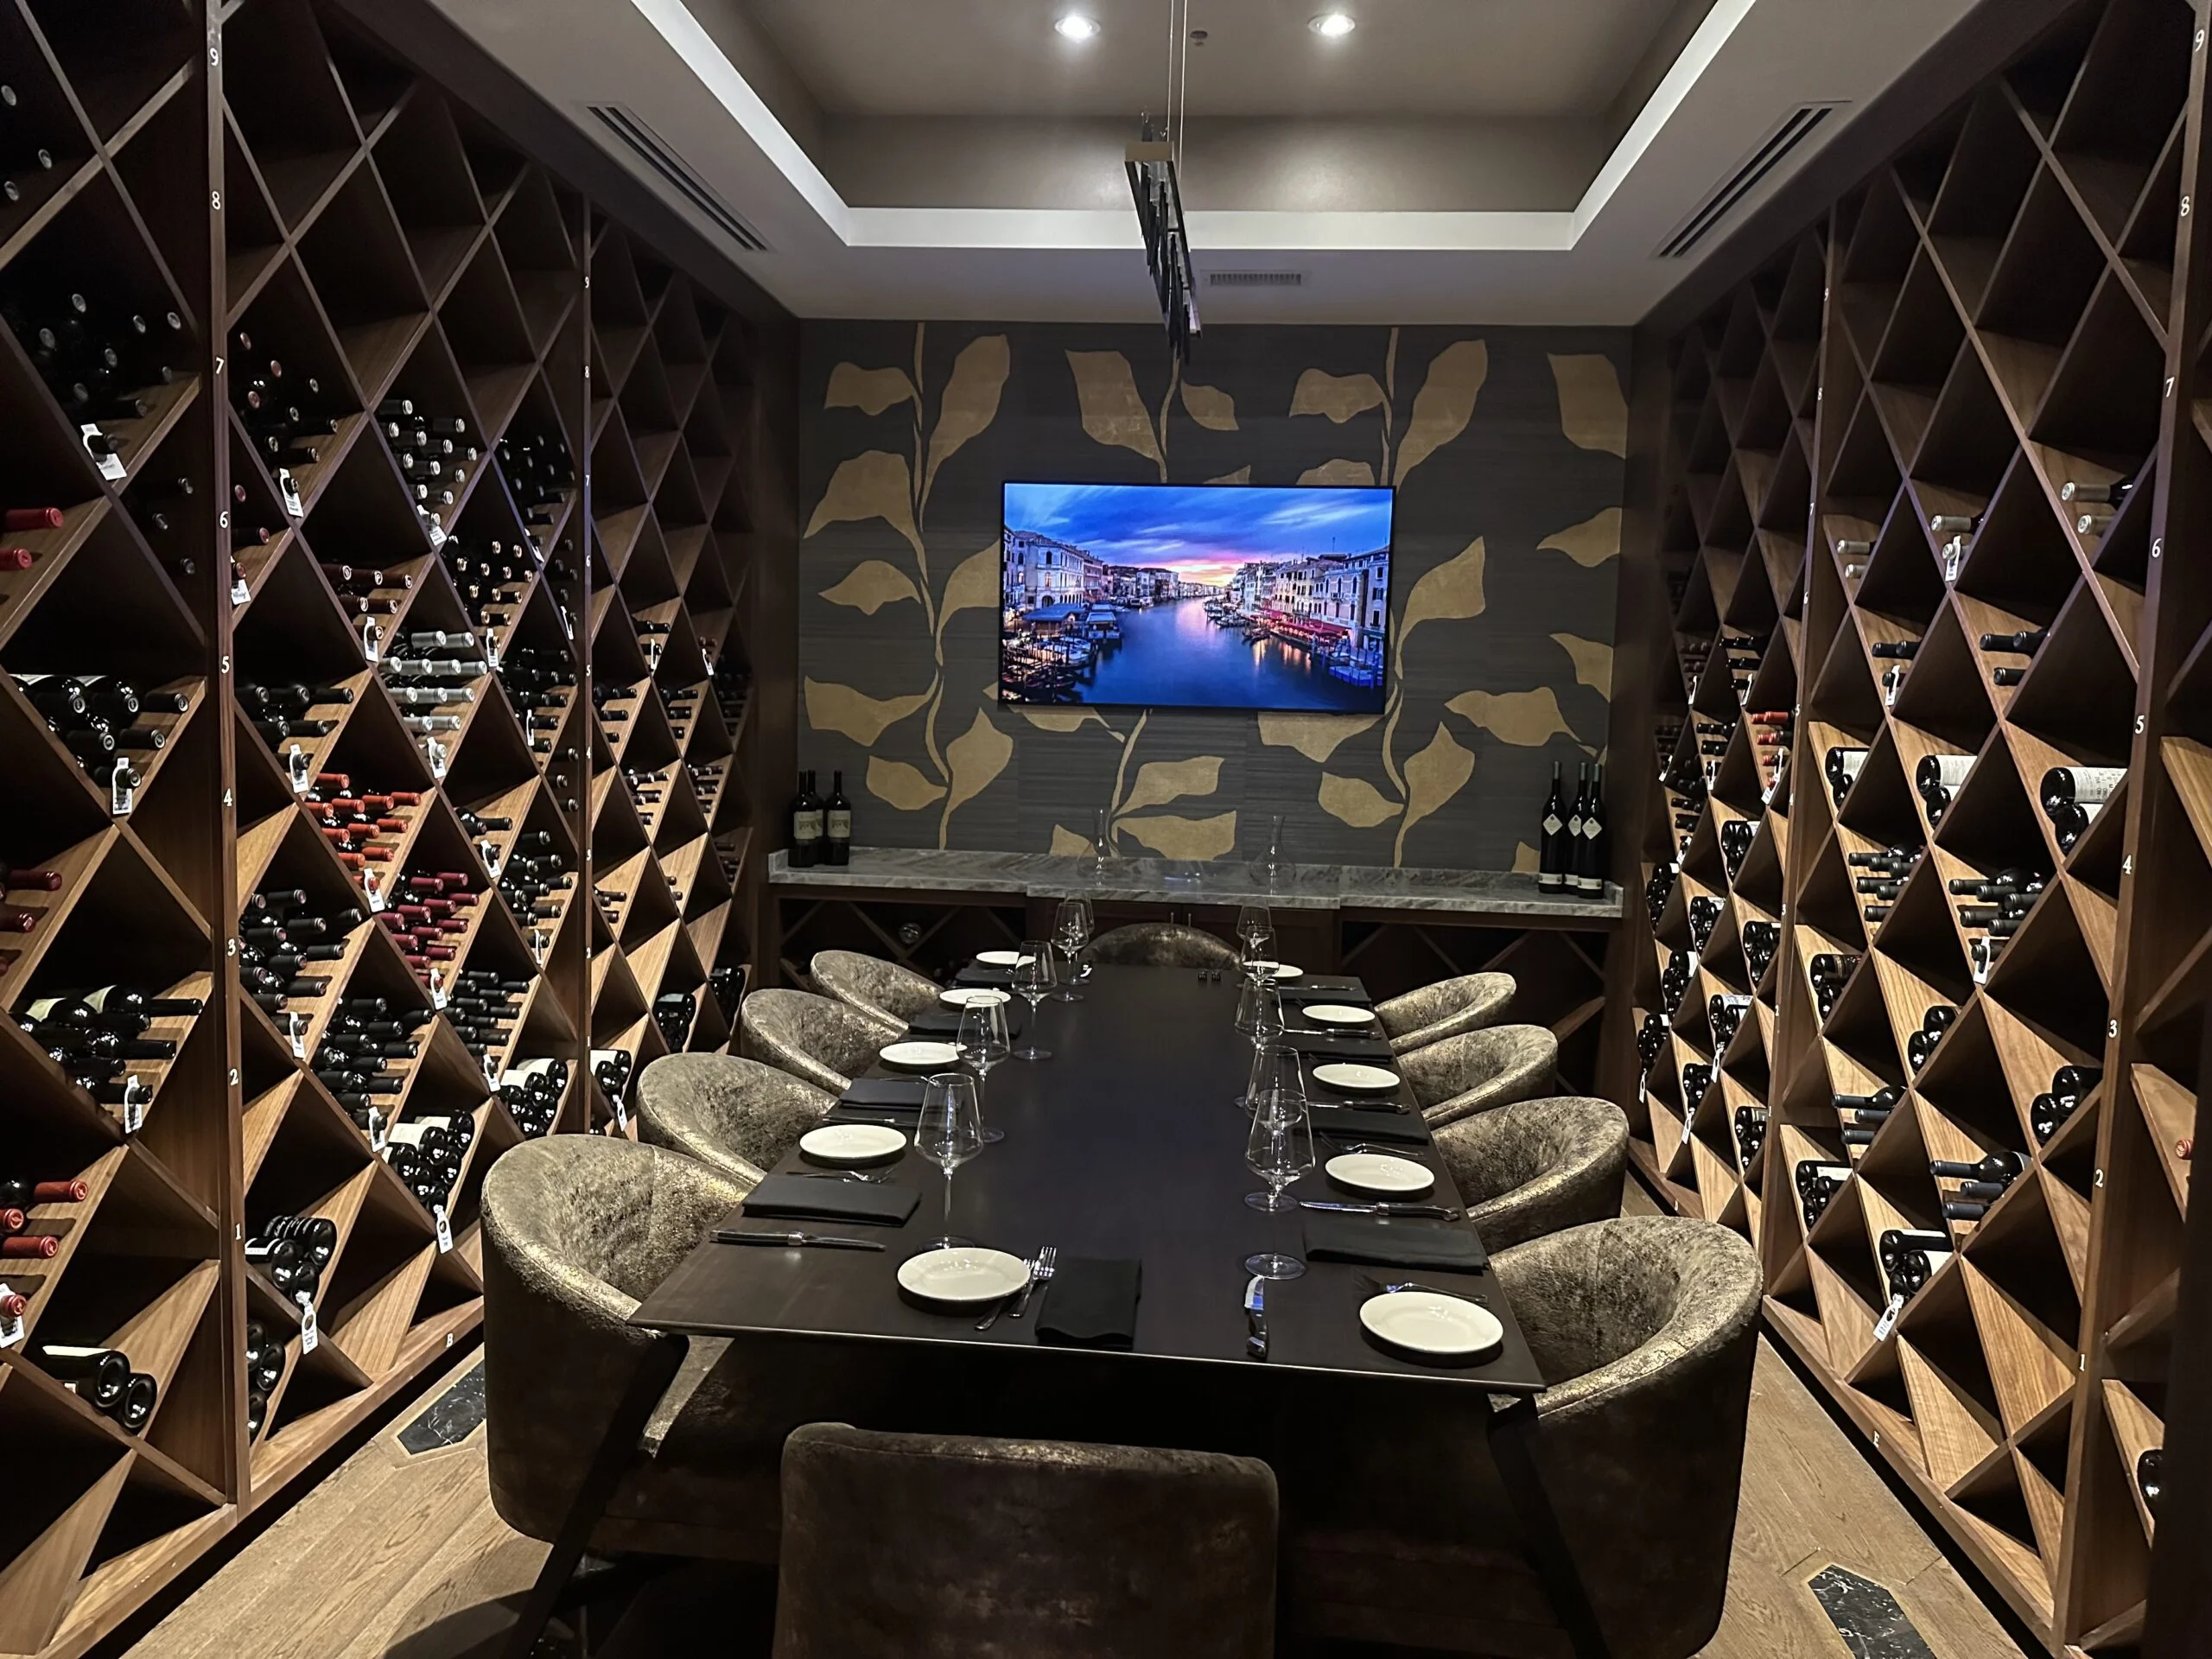 Bob’s Steak & Chop House displays wine around a table for guests
